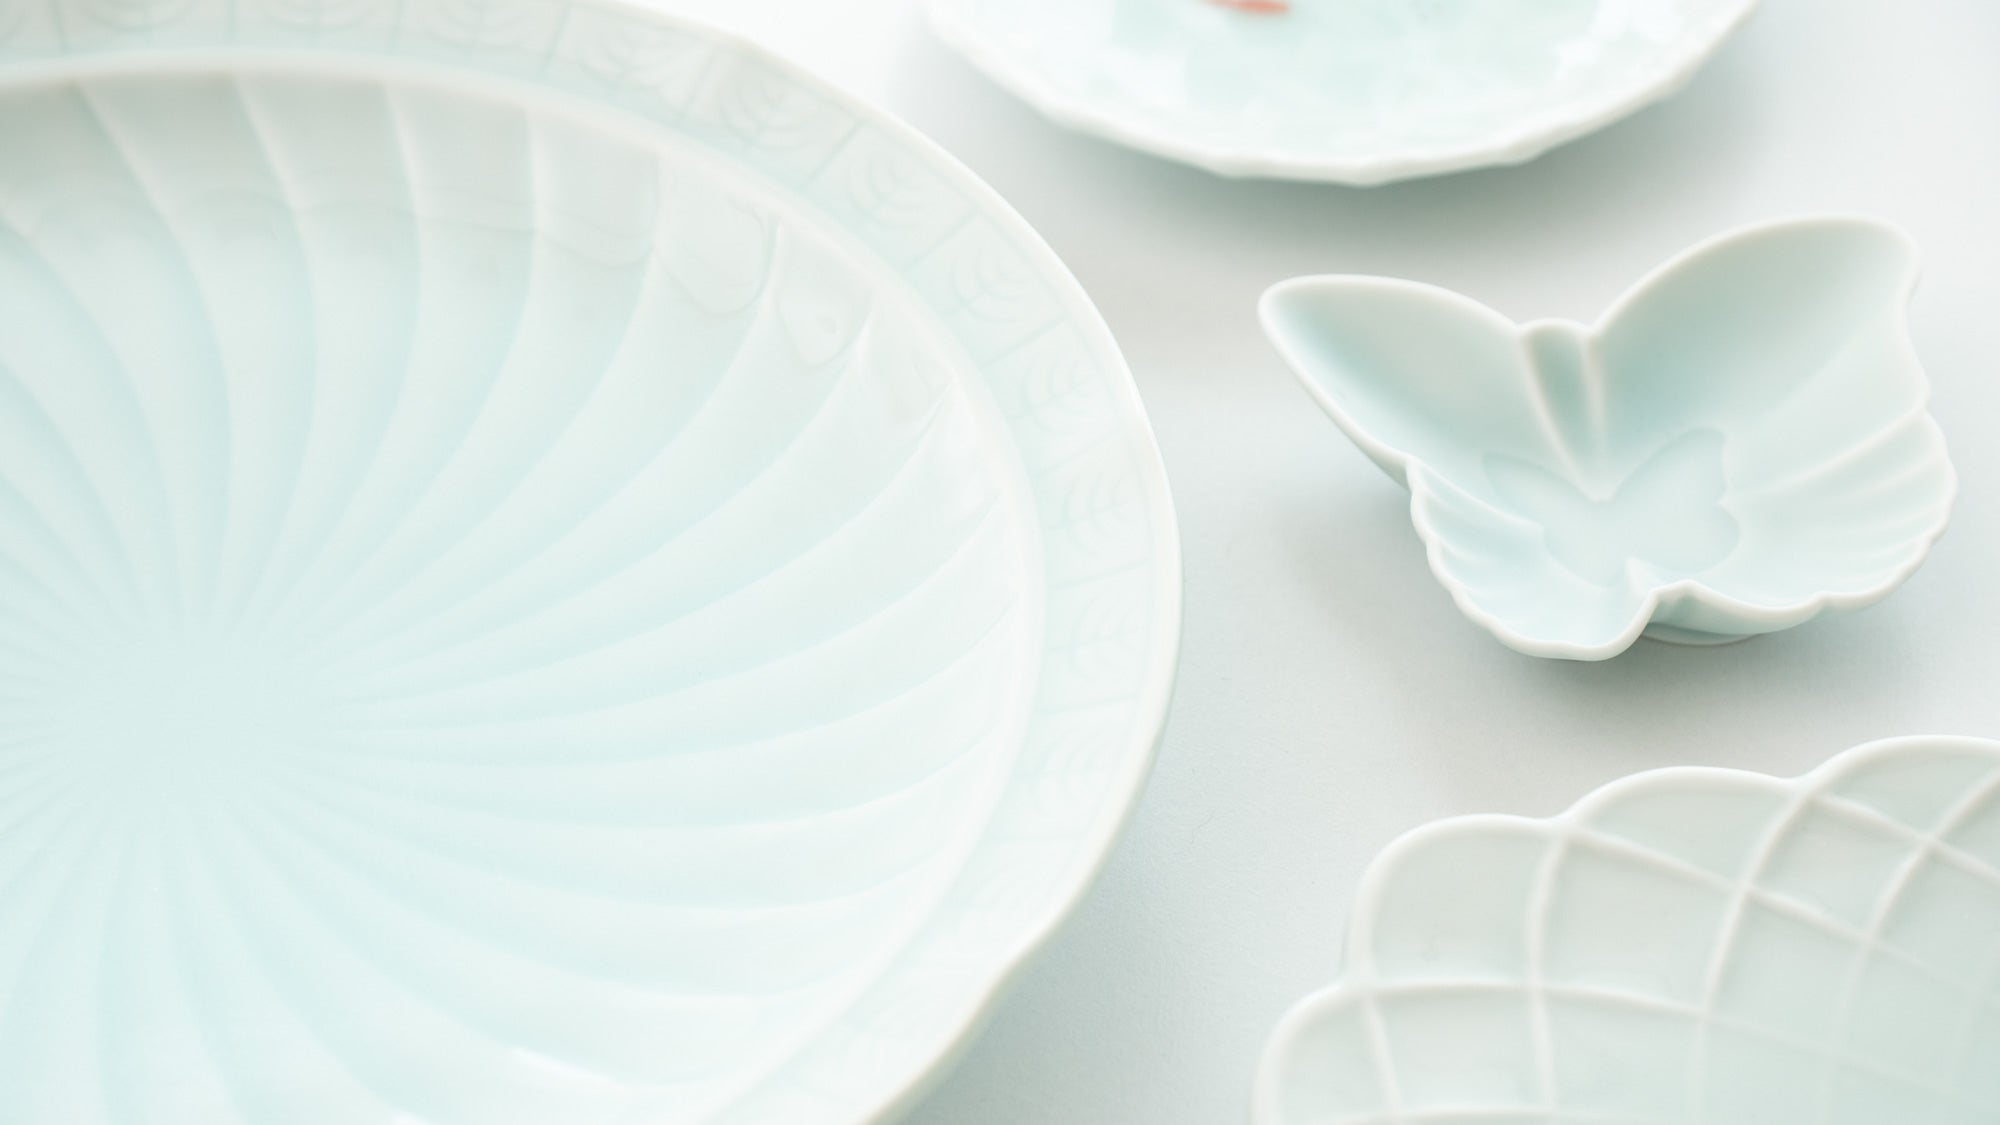 Timeless Treasures: Japan's Love of Celadon Porcelain Throughout the Years